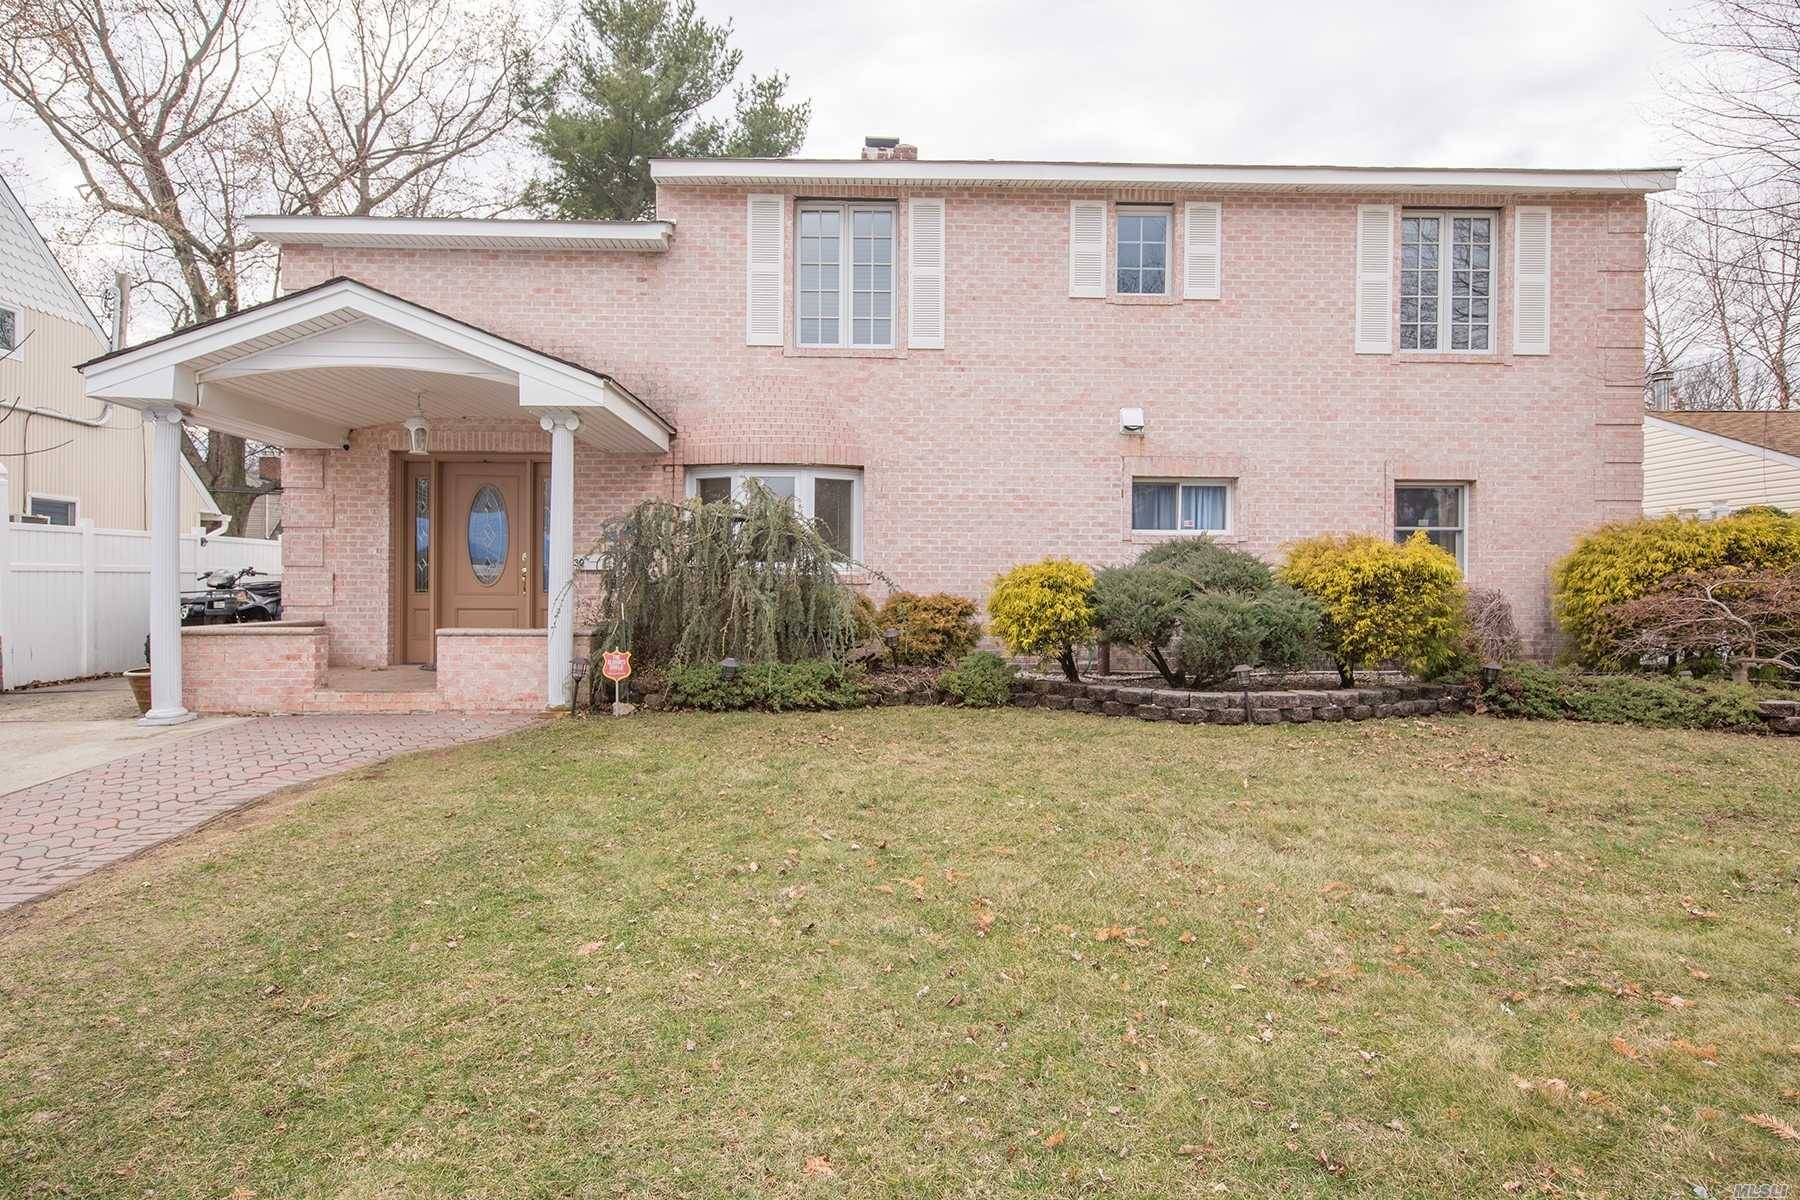 Immaculate Brick Colonial Featuring 5/7 Bedrooms, 2 Living Rooms, 2 Baths In Prime Location.